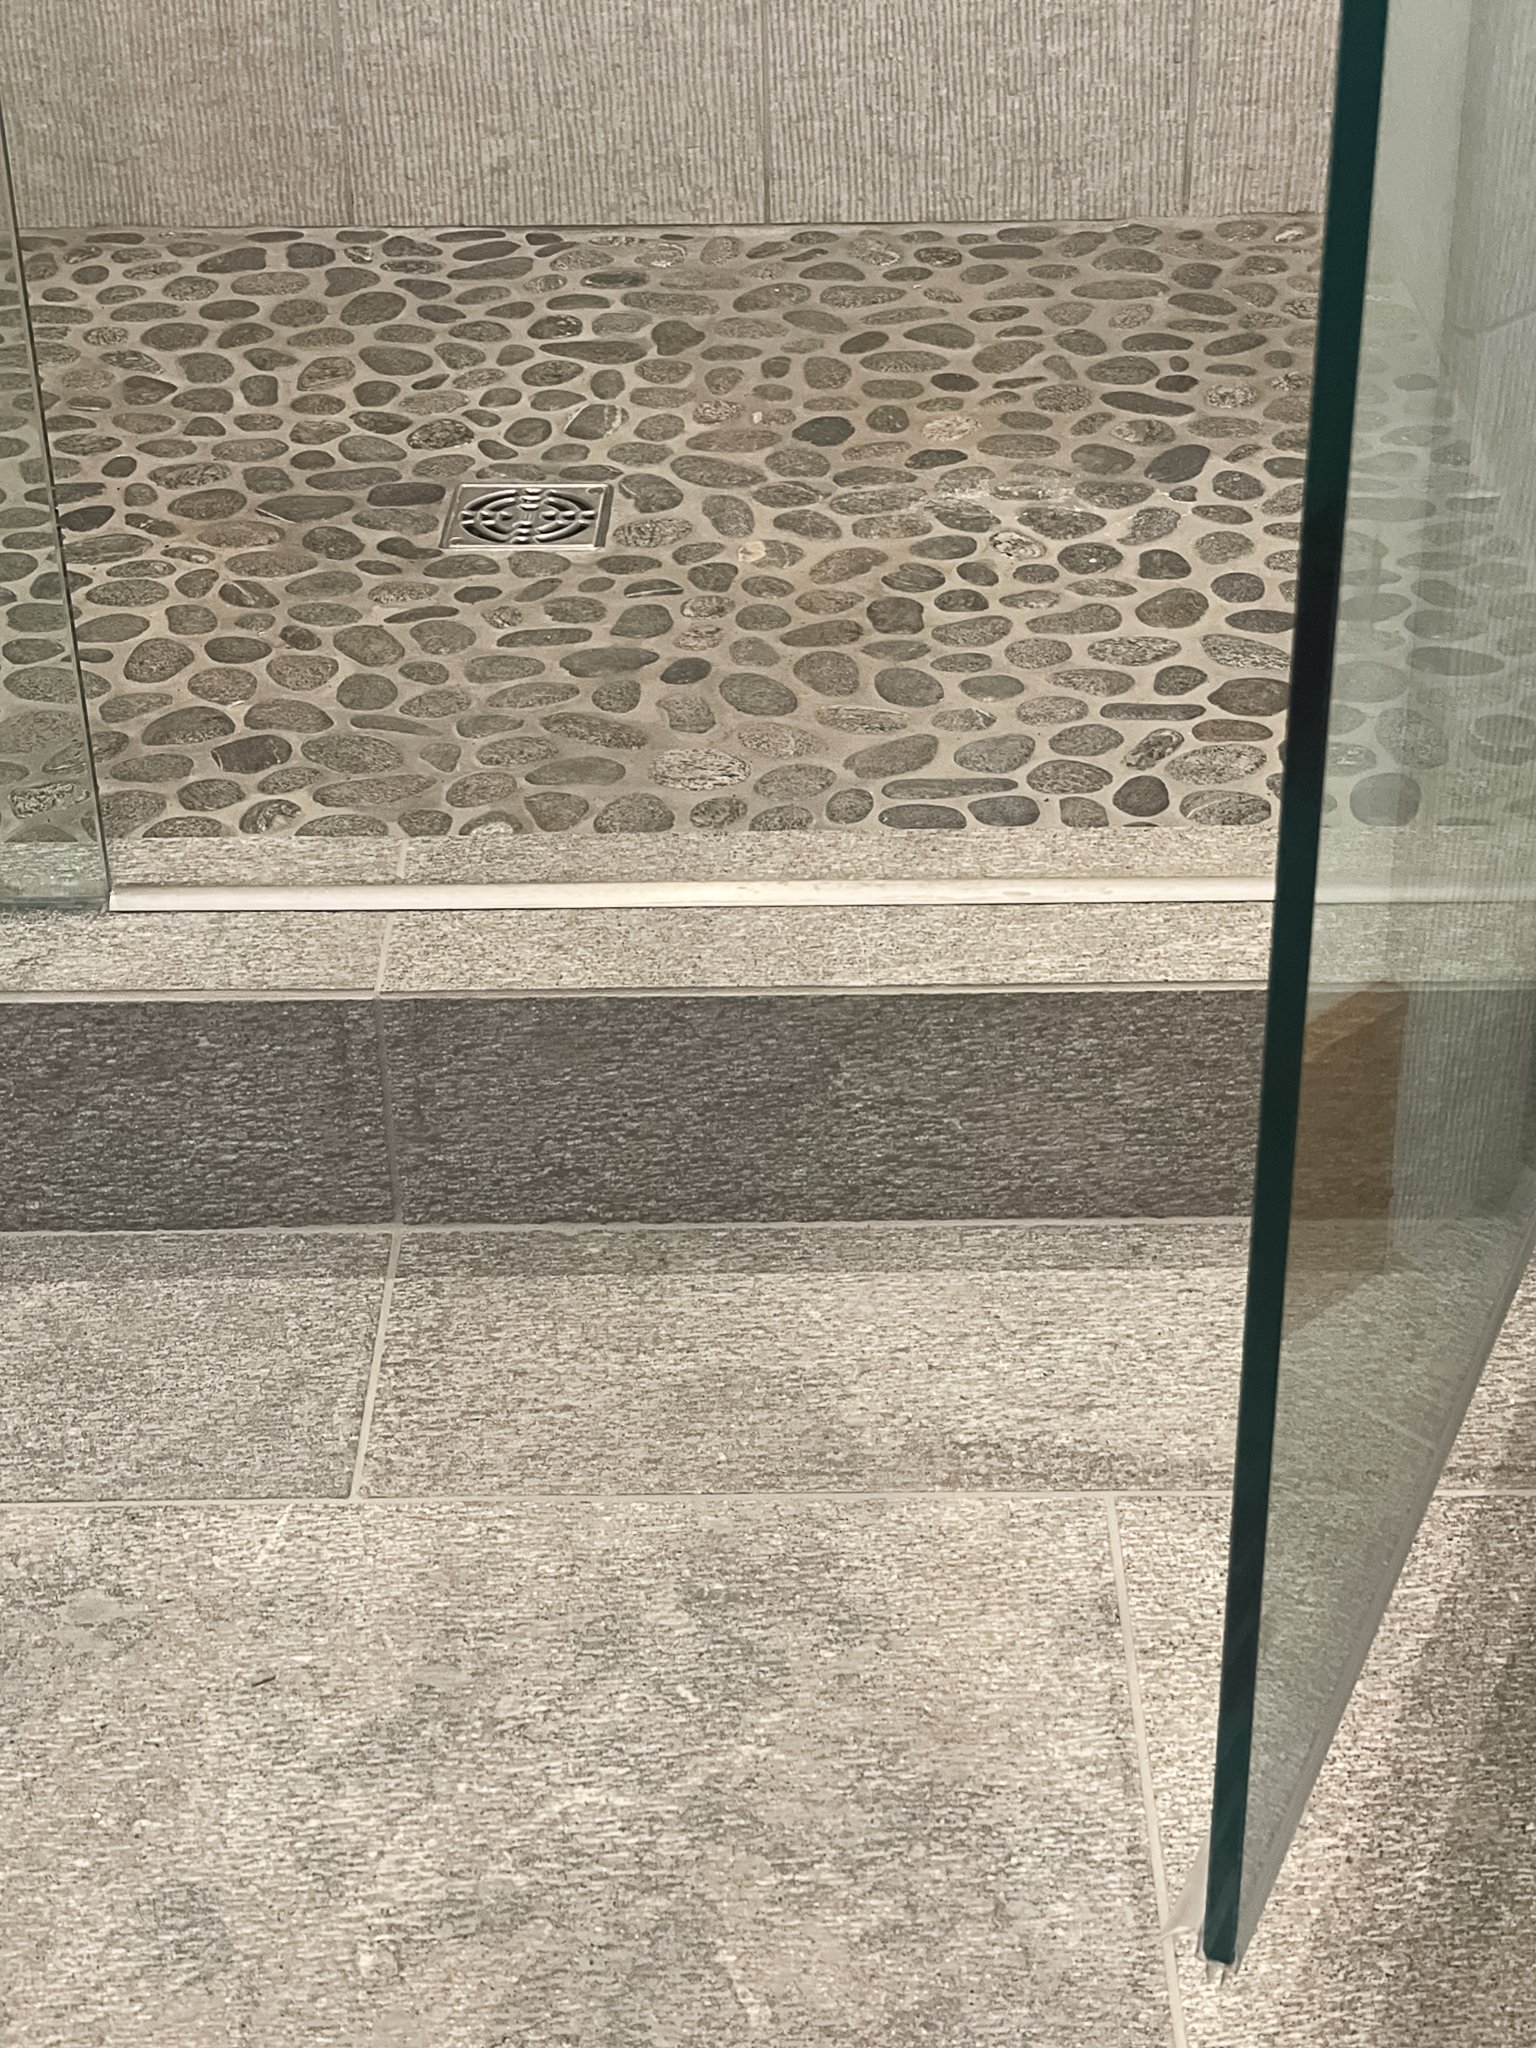  A bathroom floor with small grey river stone shower floor next to a textured grey stone tile floor.  